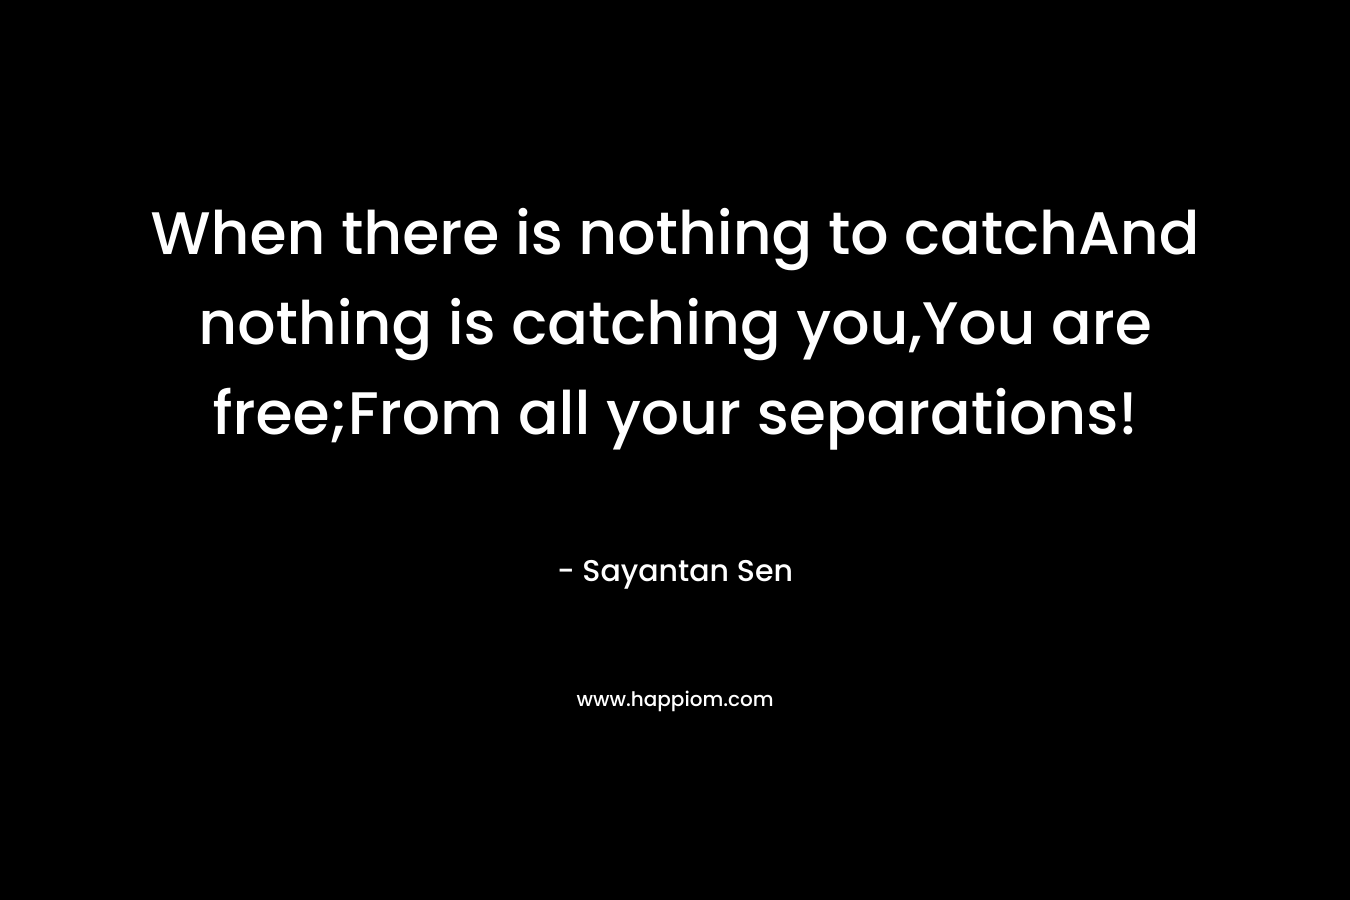 When there is nothing to catchAnd nothing is catching you,You are free;From all your separations! – Sayantan Sen